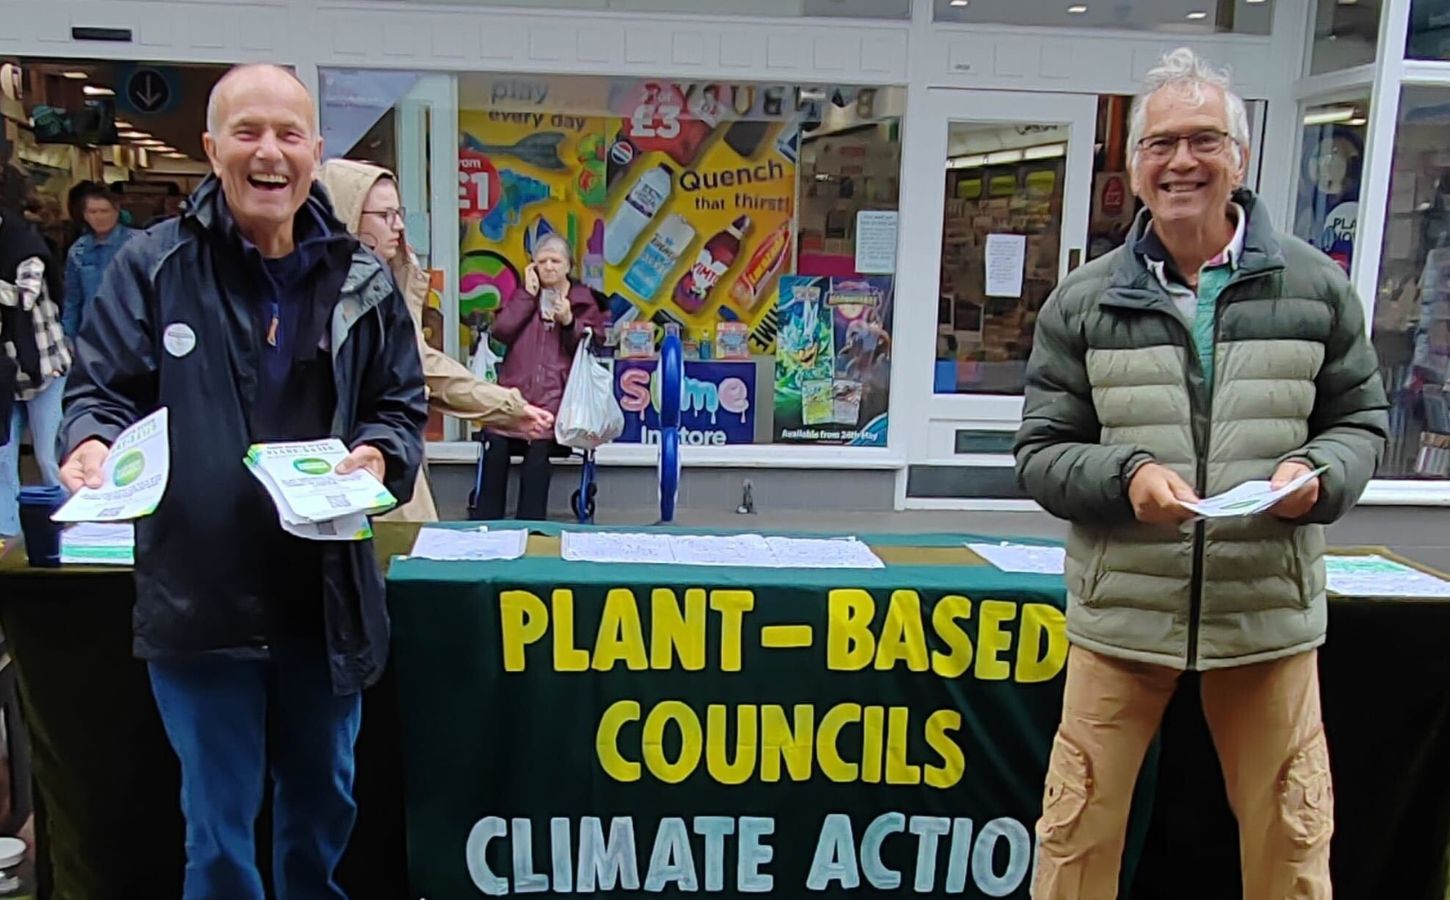 Photo shows Plant Based Councils campaigner Brian Garman (left( and Green Councilor Ricky Knight (right) conducting public outreach in Barnstaple, North Devon